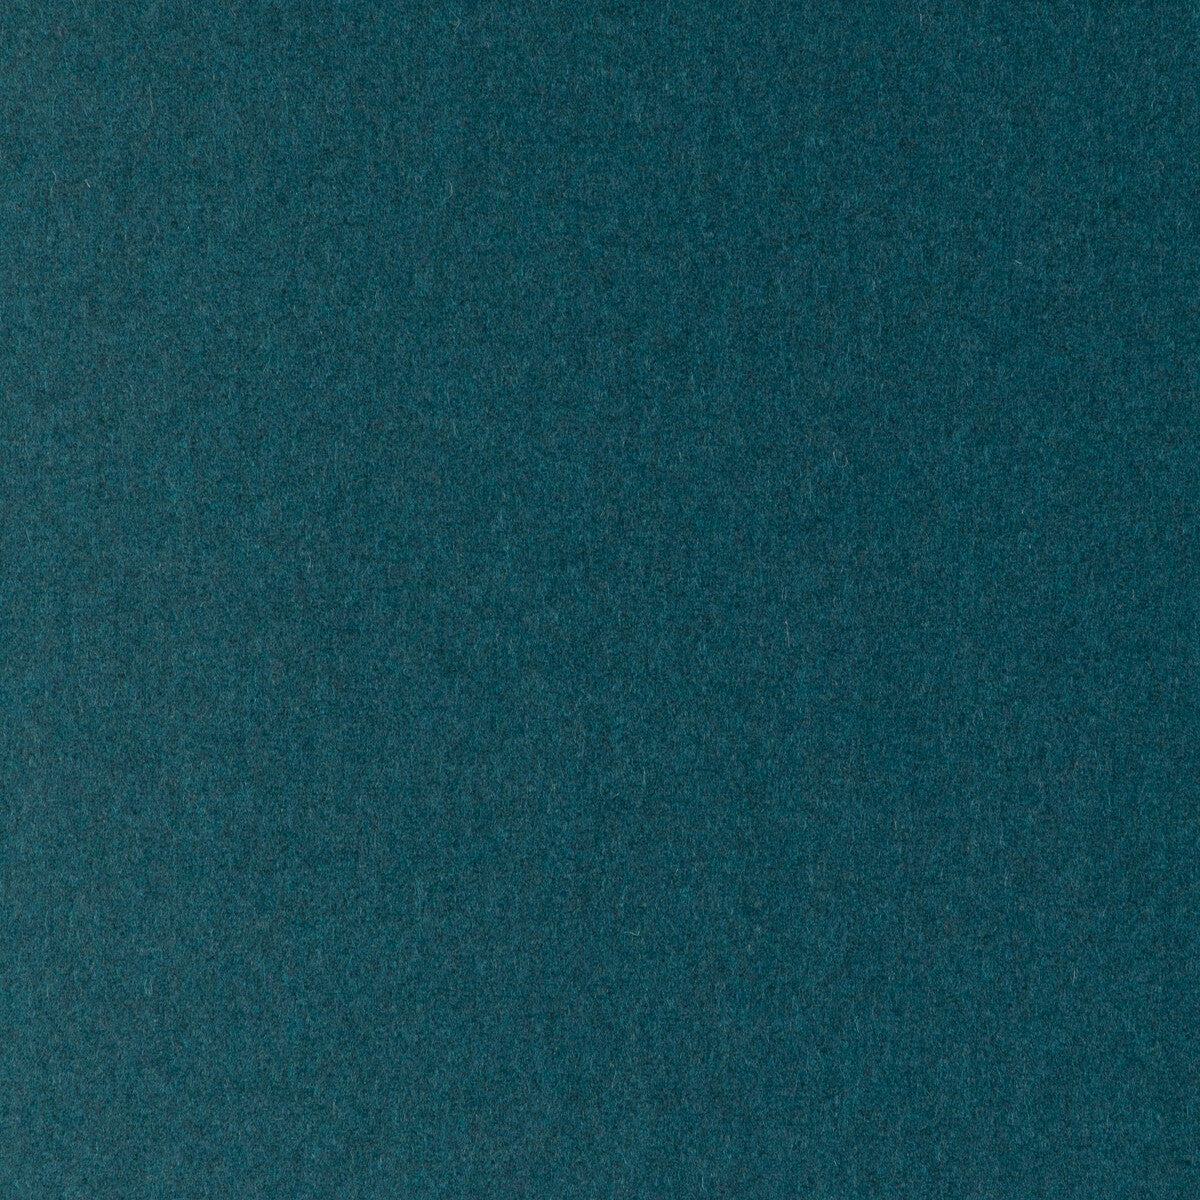 Jefferson Wool fabric in neptune color - pattern 34397.1311.0 - by Kravet Contract